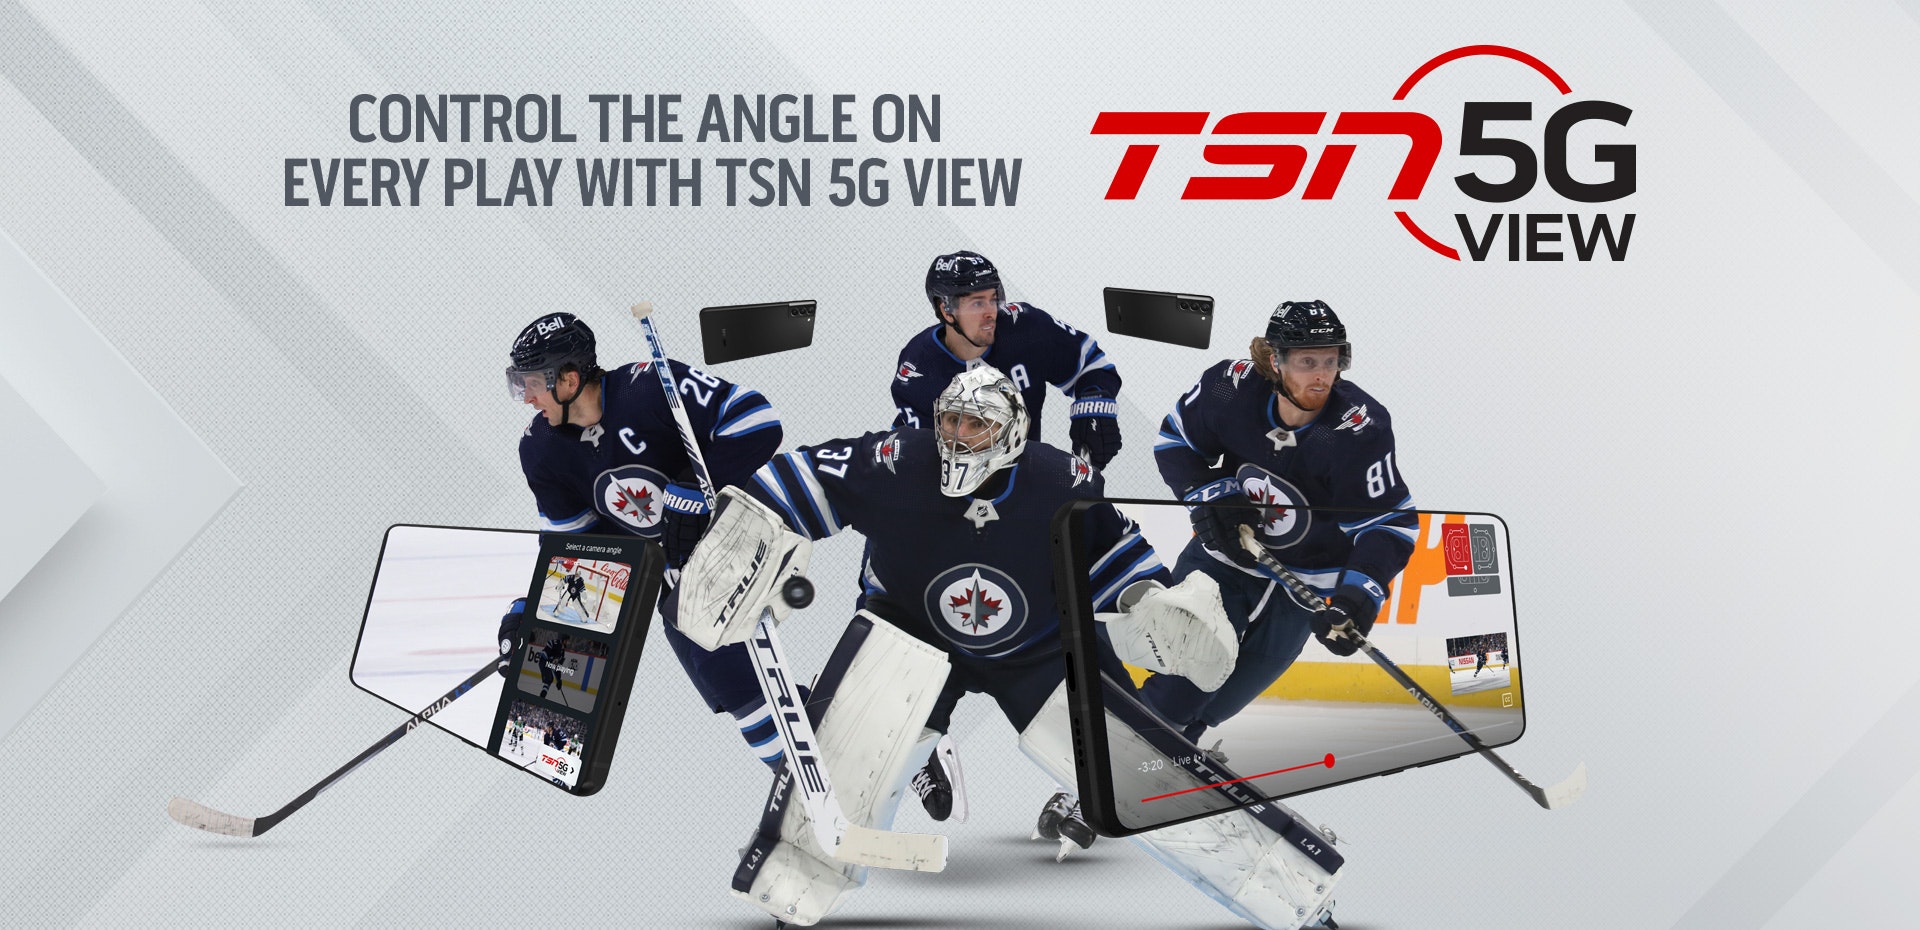 TSN 5G View Launches in Winnipeg for the Networks Regional Coverage of JETS ON TSN Games